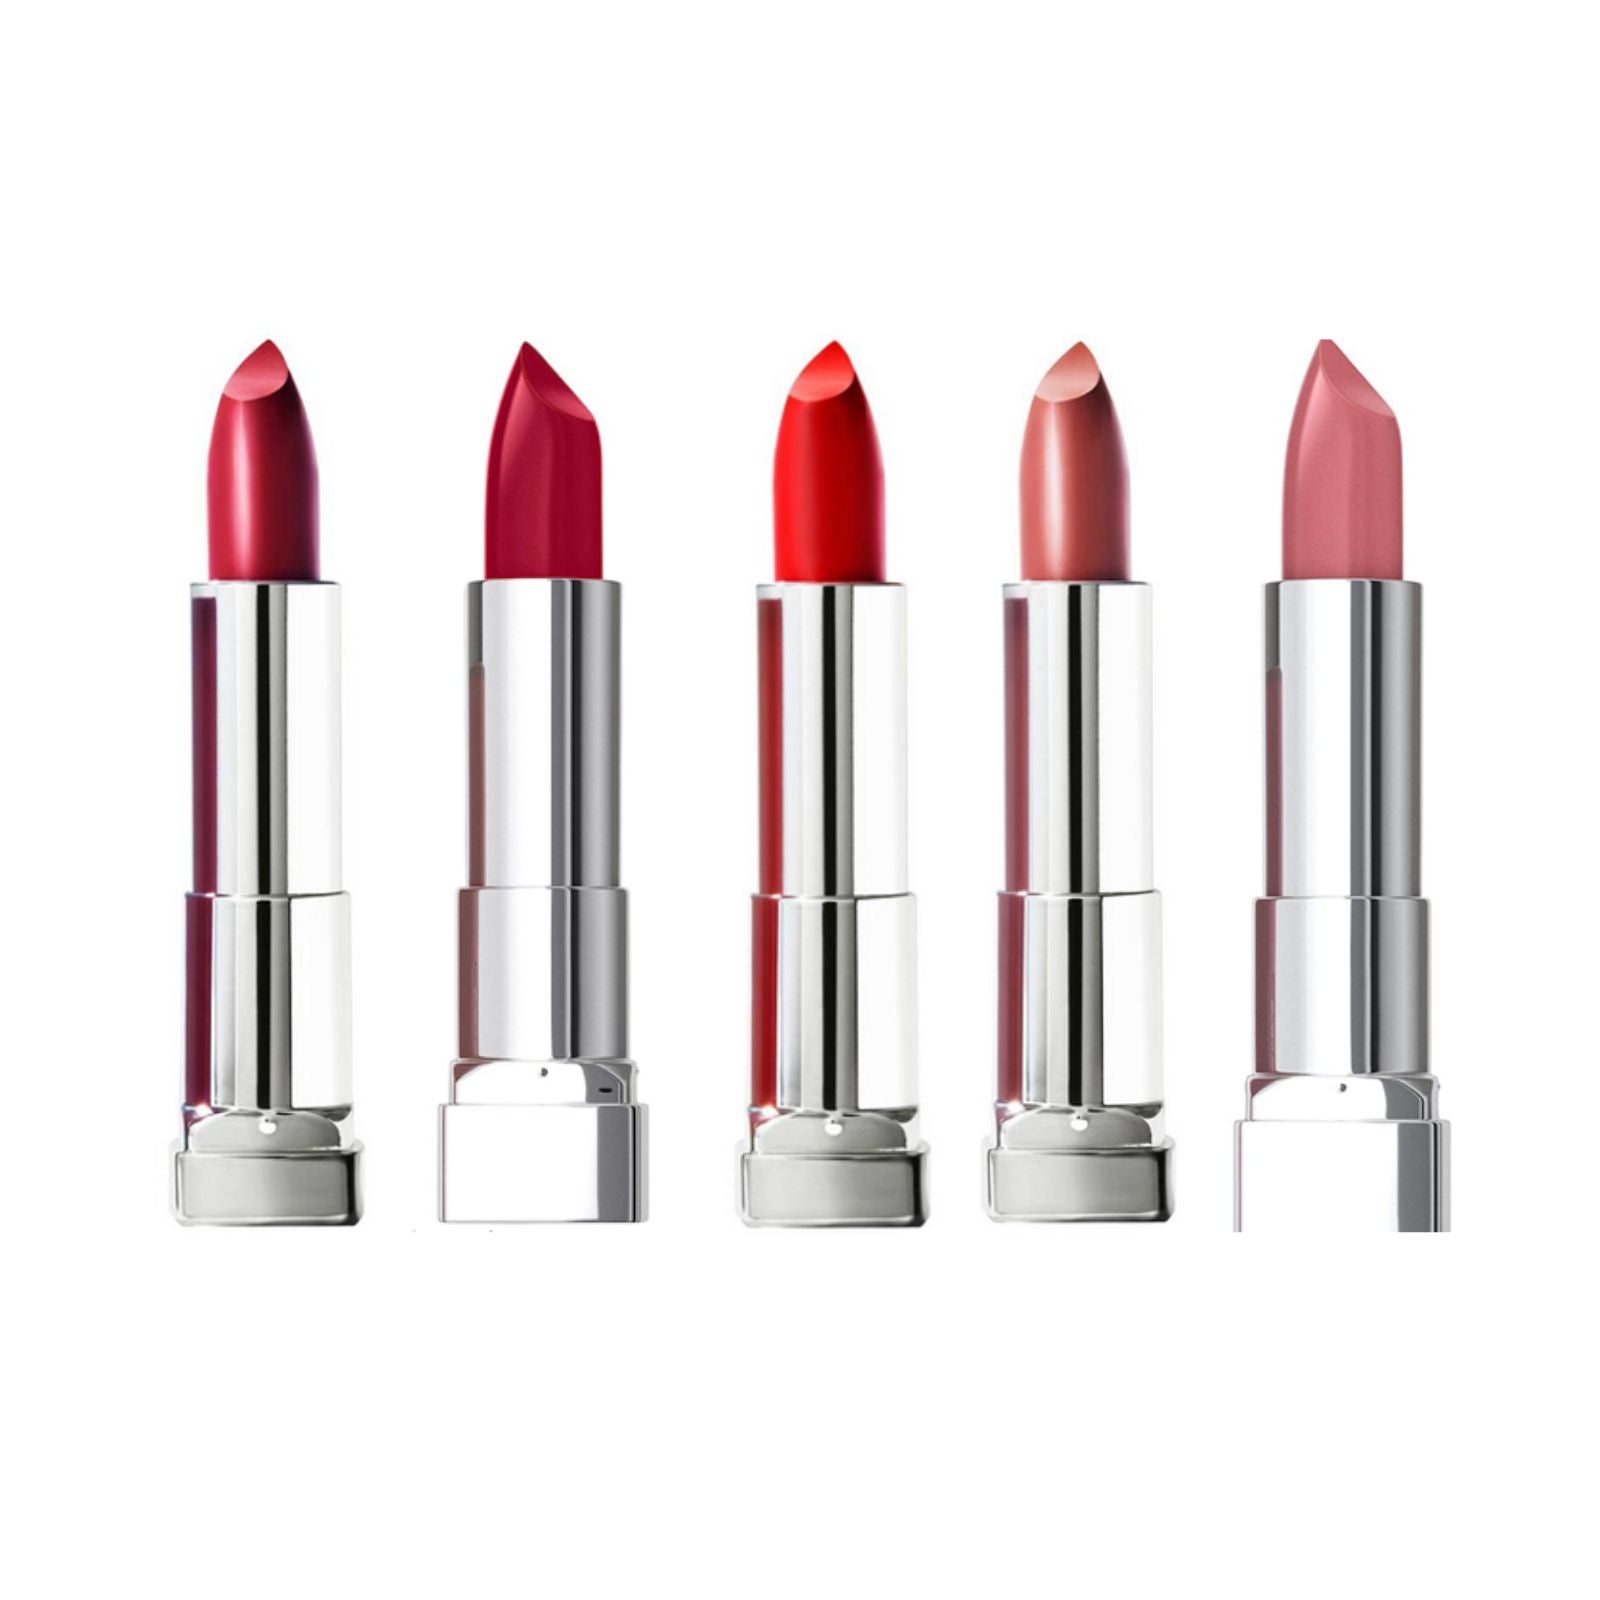 Lipstick: Hydrating Striking Color, – Long-lasting Maybelline Makeup & Anytime